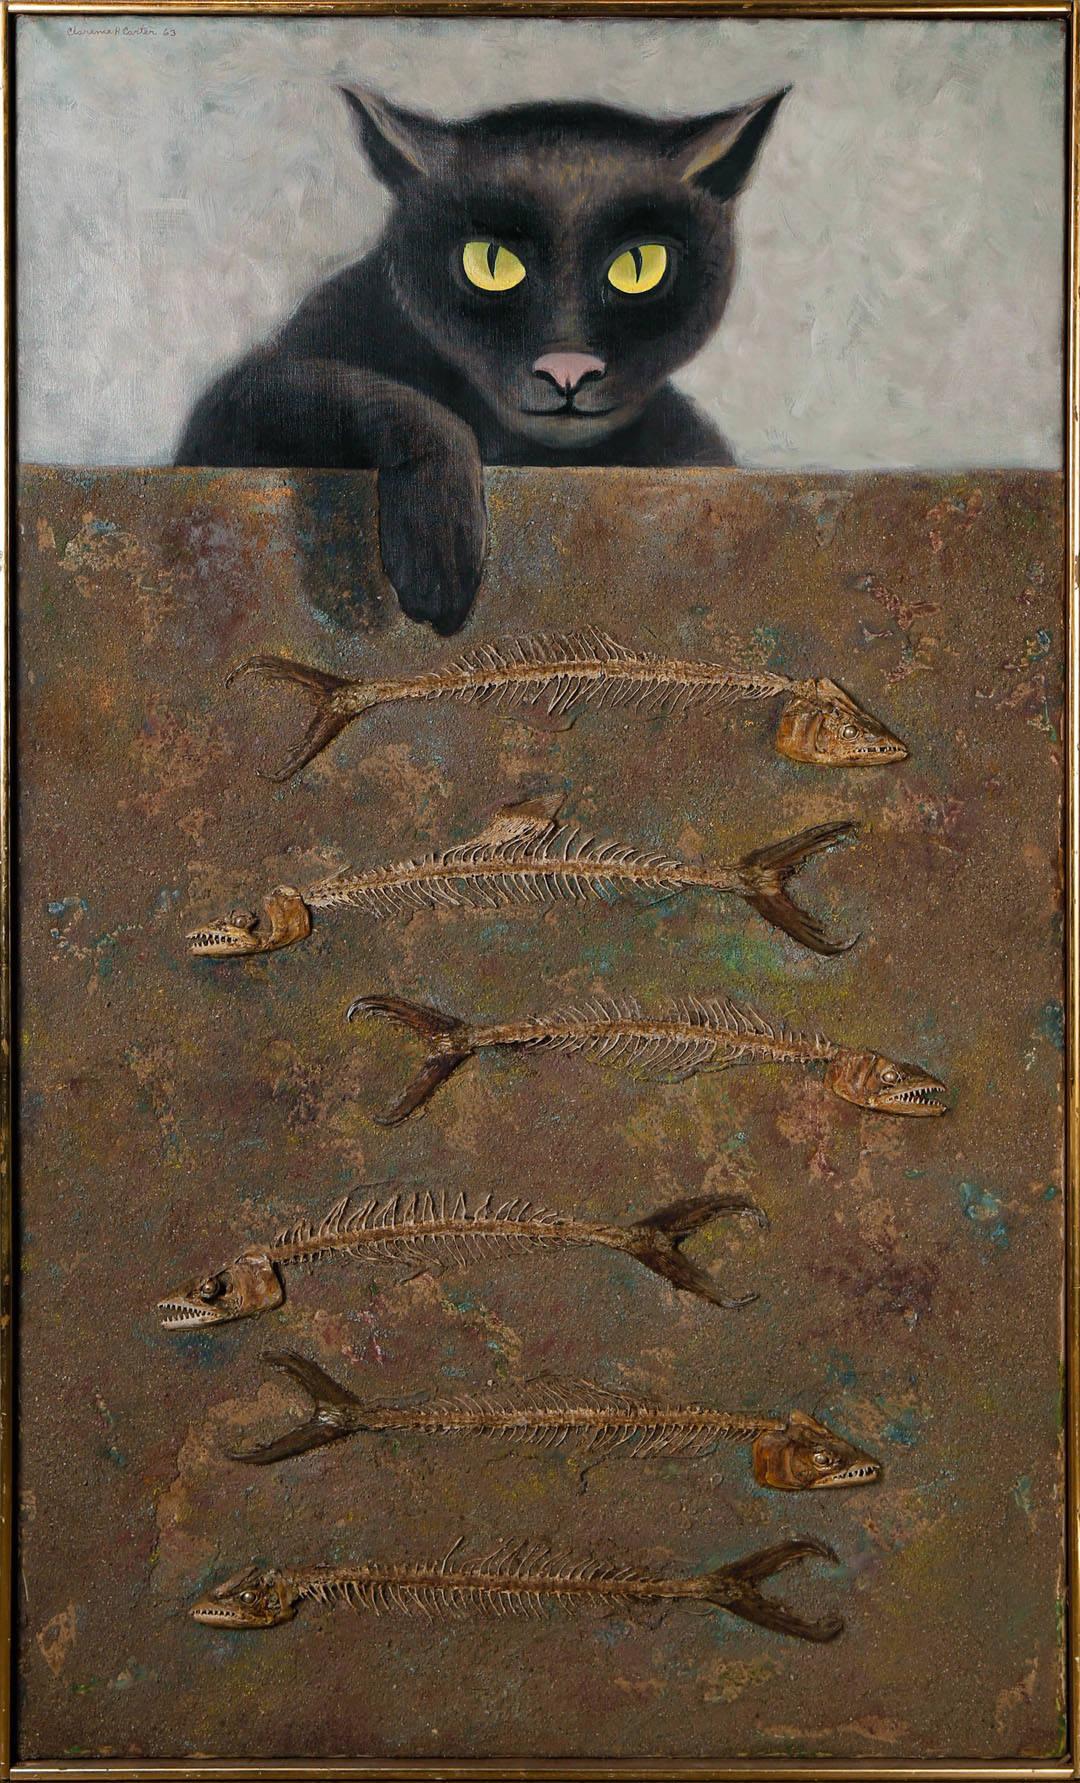 Over and Above: No. 6, Surreal Cat w/ Fish Bones, 20th Century Cleveland School